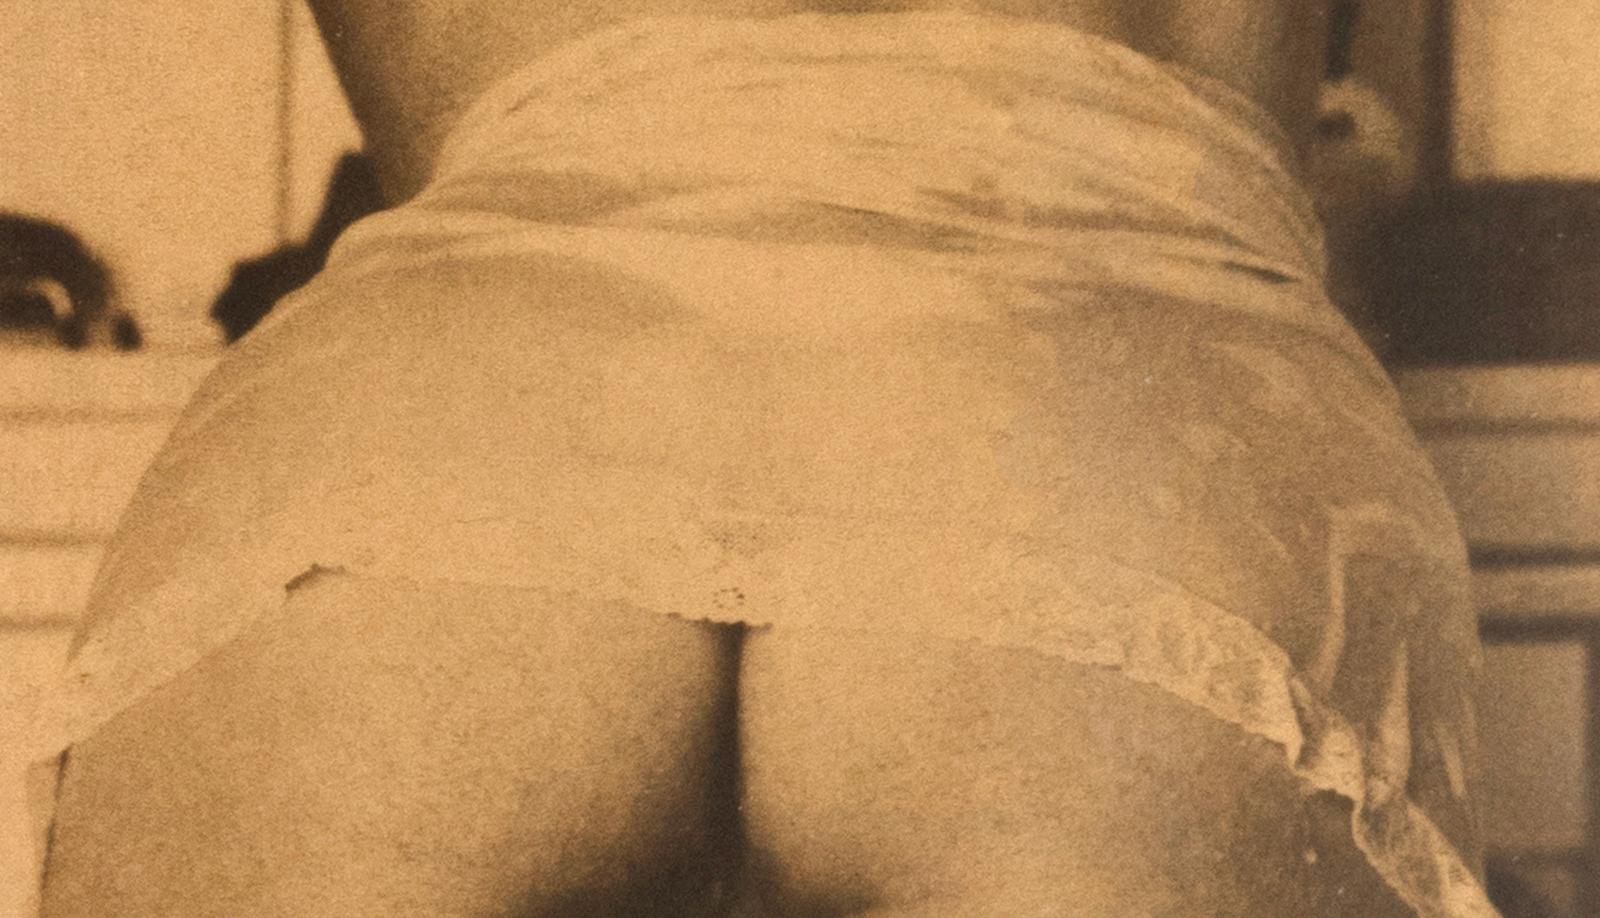 Nude 01  -    Platinum Palladium print over 24 carat Gold leaf on vellum paper
Edition 1 of 8 , plus 2 AP ( size 1 )

Signed + numbered with certificate of authenticity ( signature and title are hidden here on the photos to avoid counterfeiting